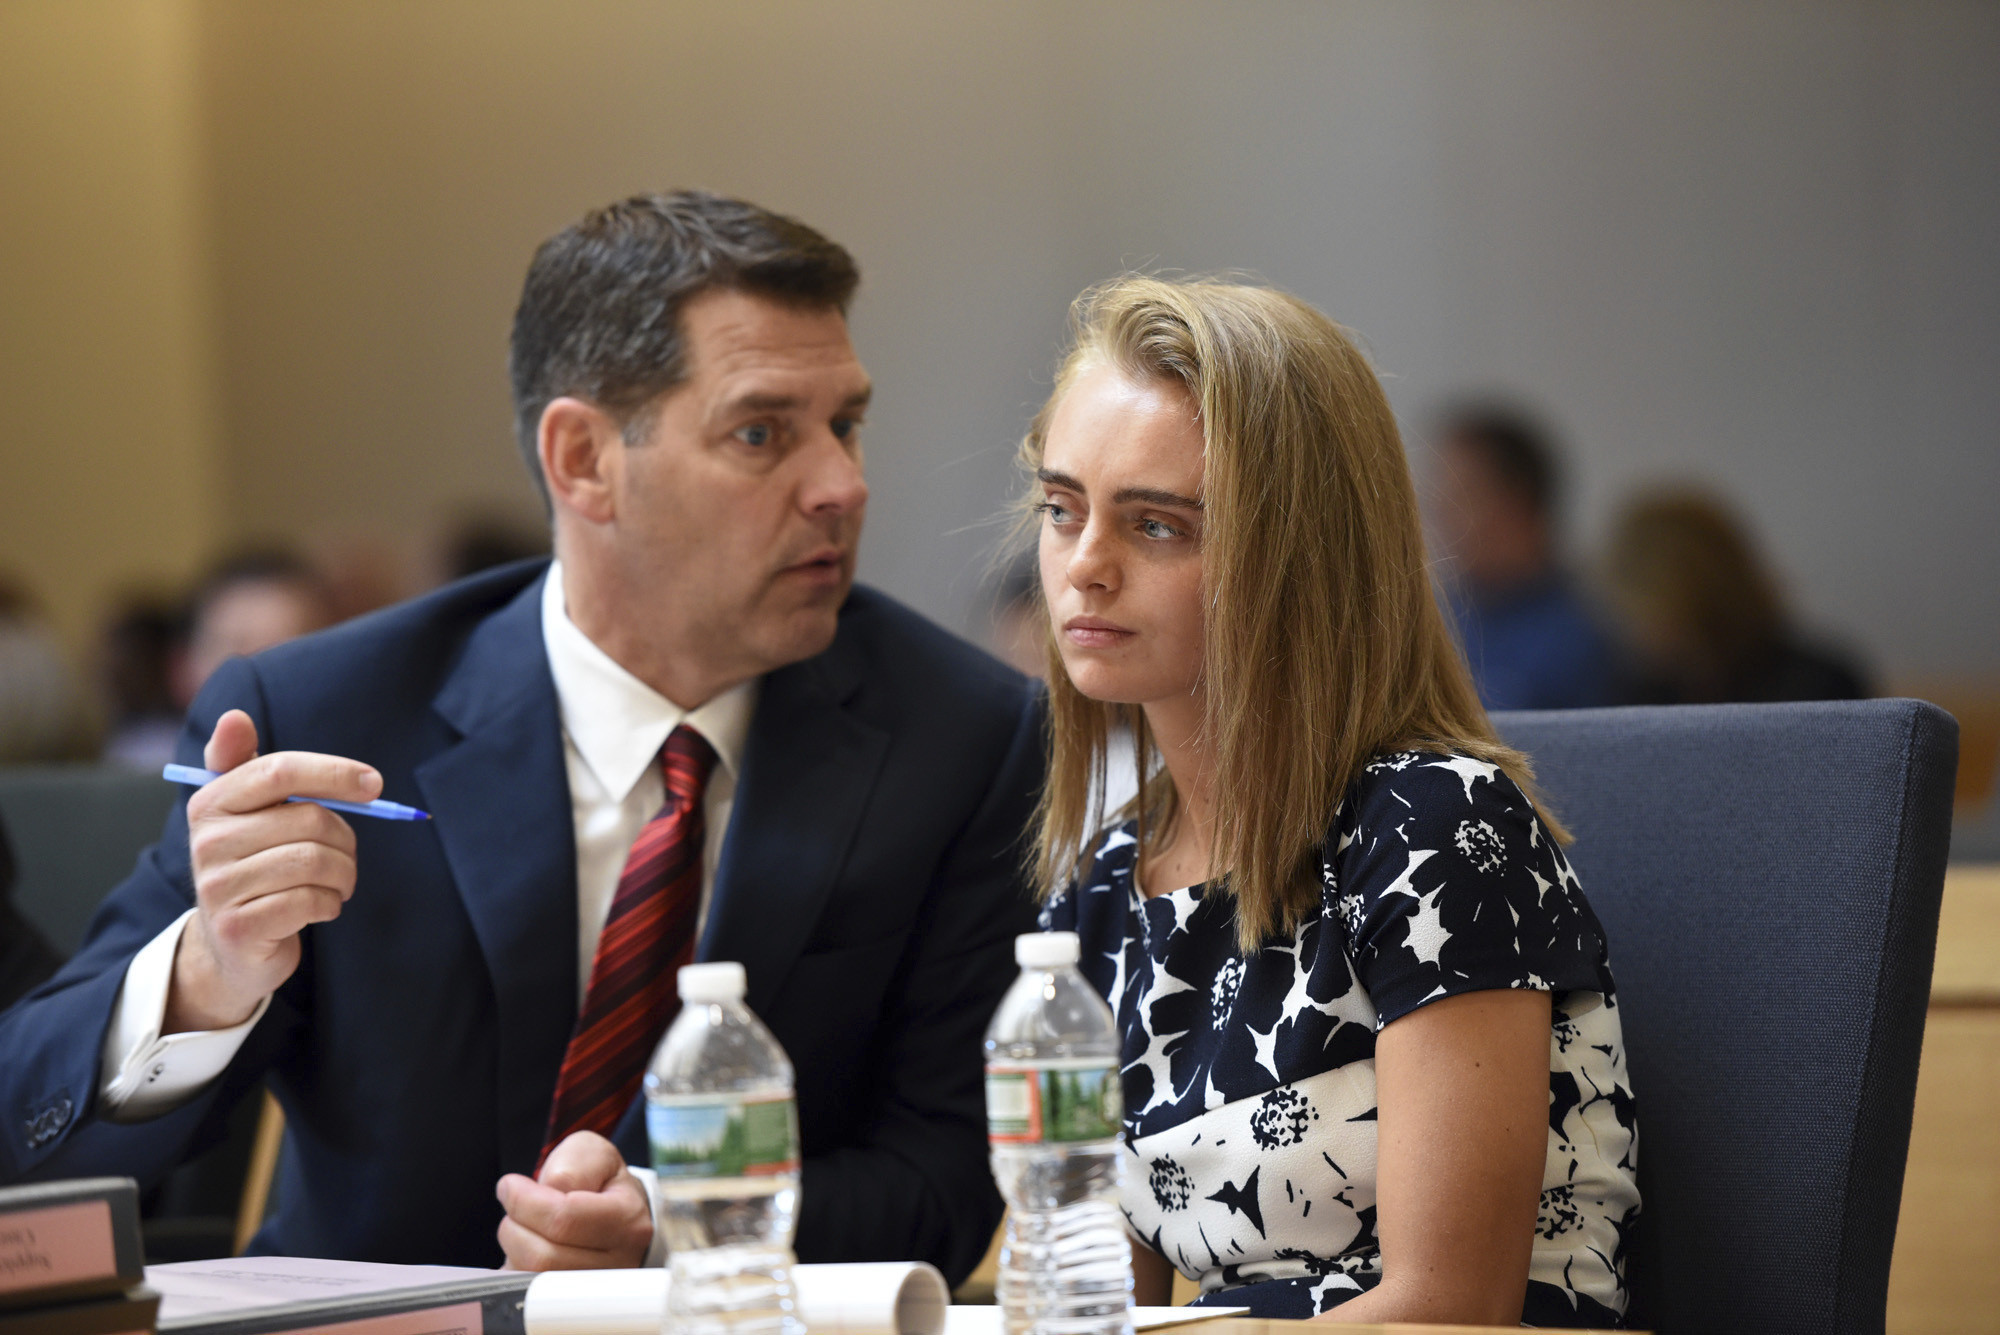 Can words kill? Michelle Carter on trial for urging her 18-year-old boyfriend to kill ...2000 x 1335